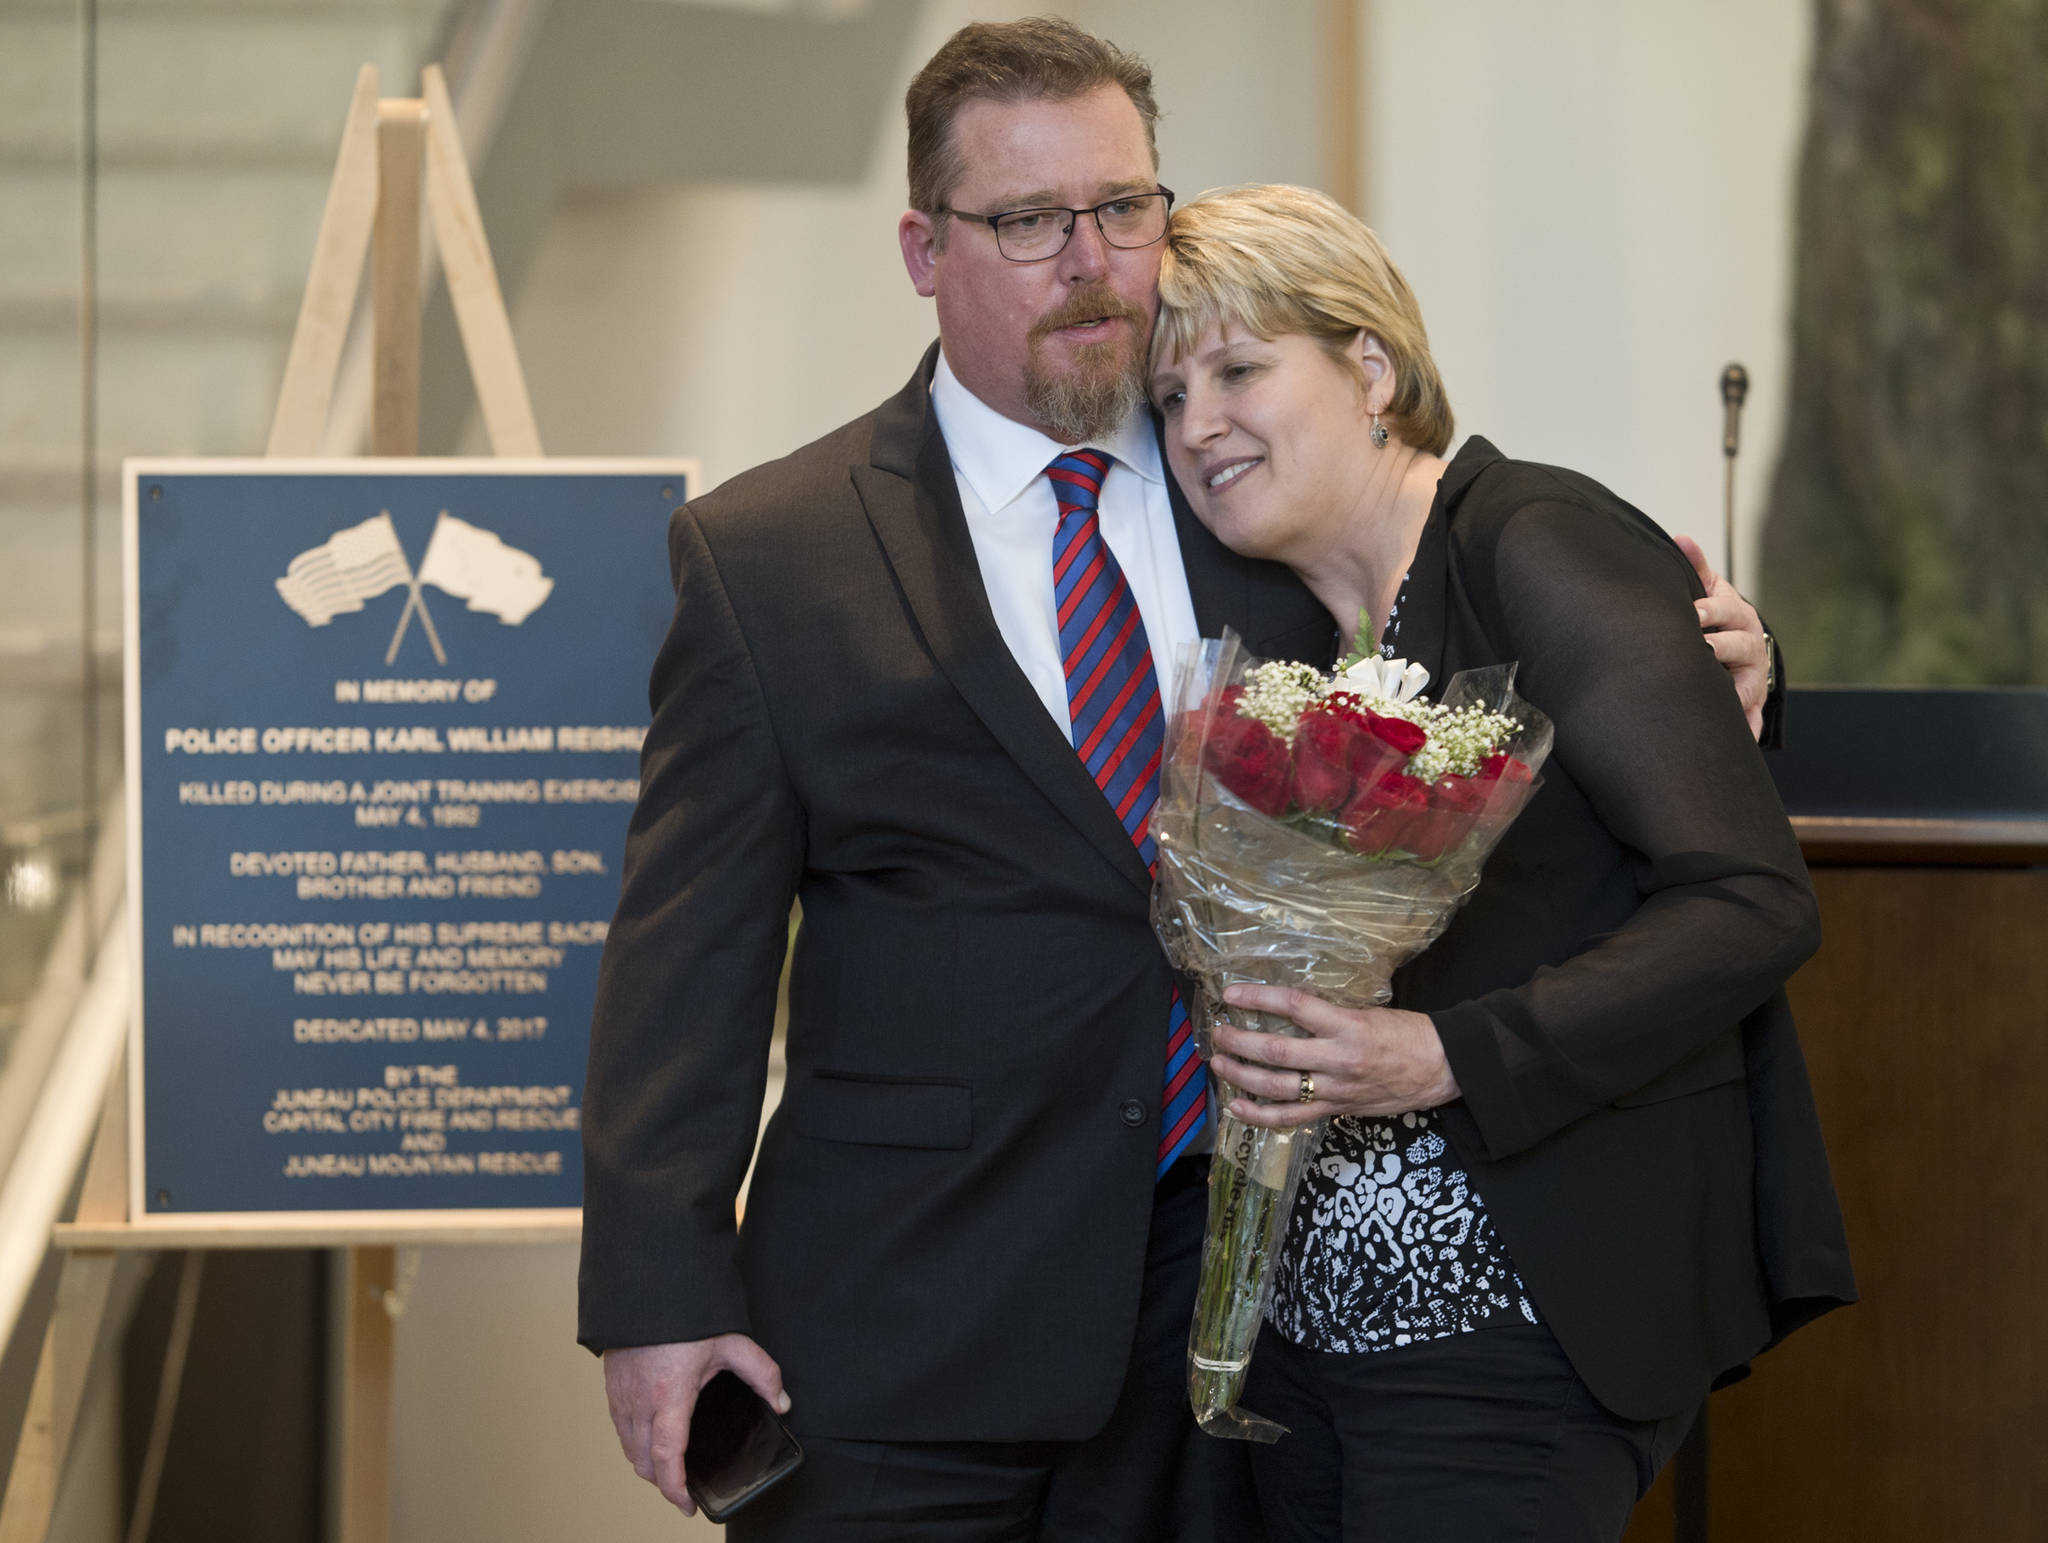 Former Juneau firefighter Dave Stott gives Sue Reishus-O’Brien a hug at a remembrance ceremony at the Father Andrew P. Kashevaroff Building on Thursday, May 4, 2017, on the 25th anniversary of the death of Sue’s then-husband, Police Officer Karl William Reishus. Stott was injured in the same training accident that killed Reishus. (Michael Penn | Juneau Empire)